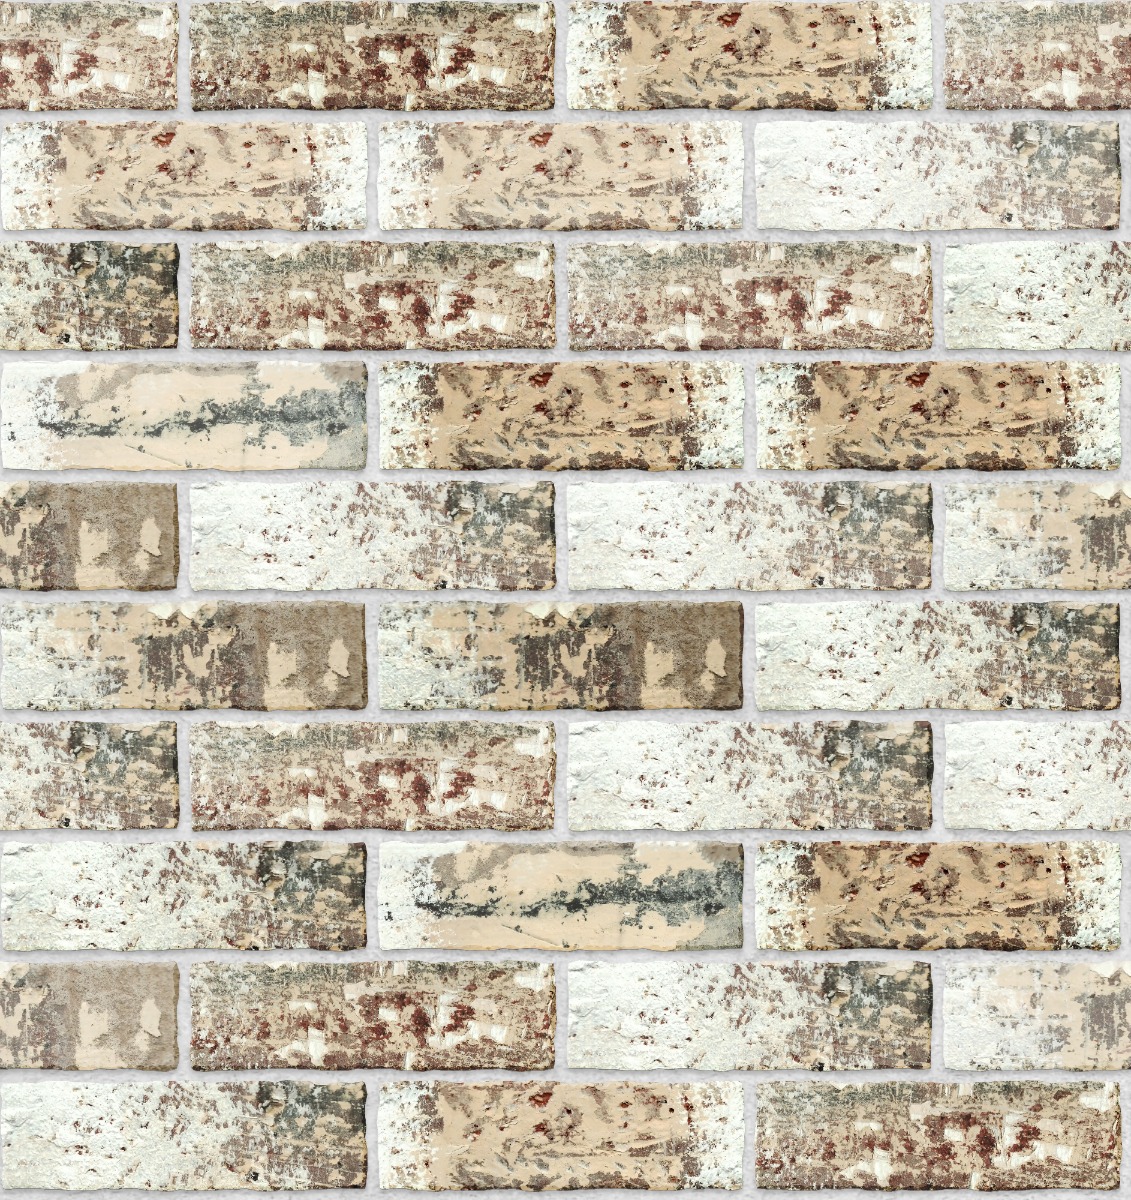 A seamless brick texture with distressed brick units arranged in a Stretcher pattern